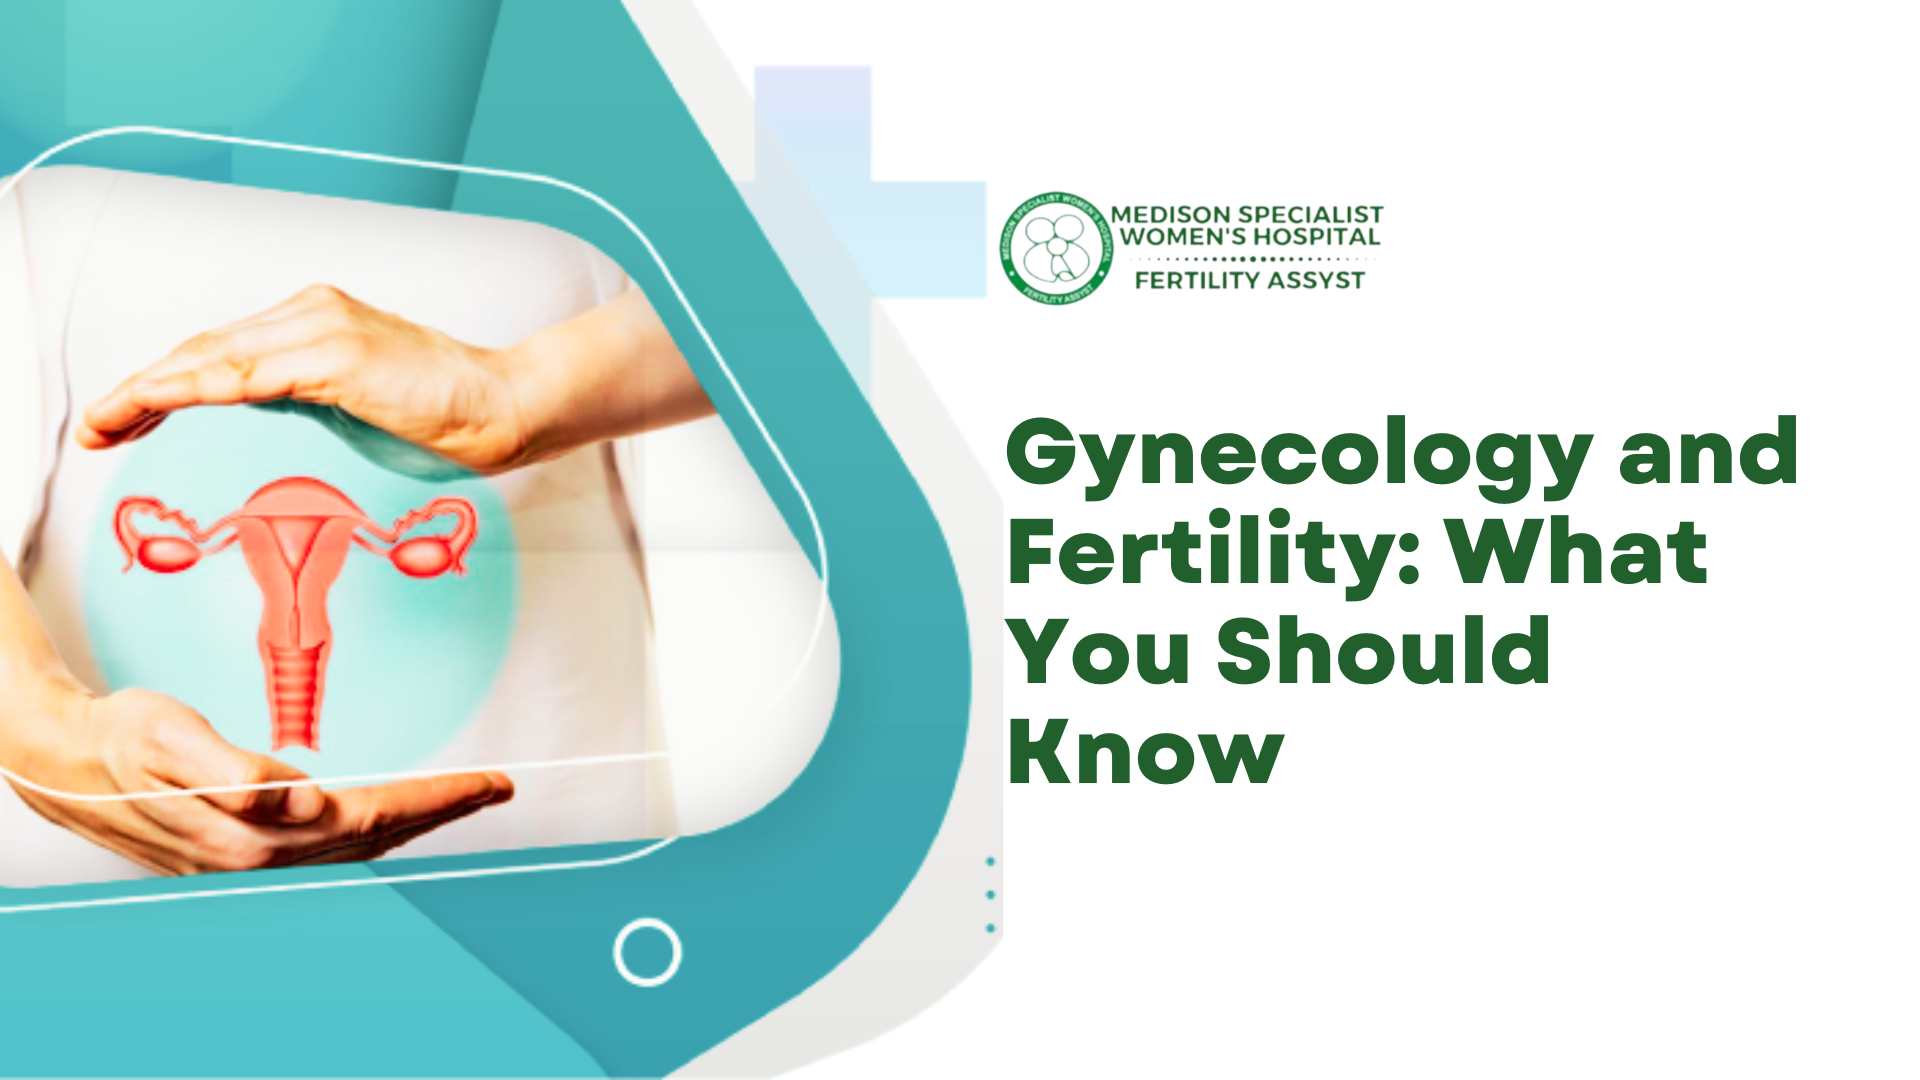 Gynecology and Fertility: What You Should Know